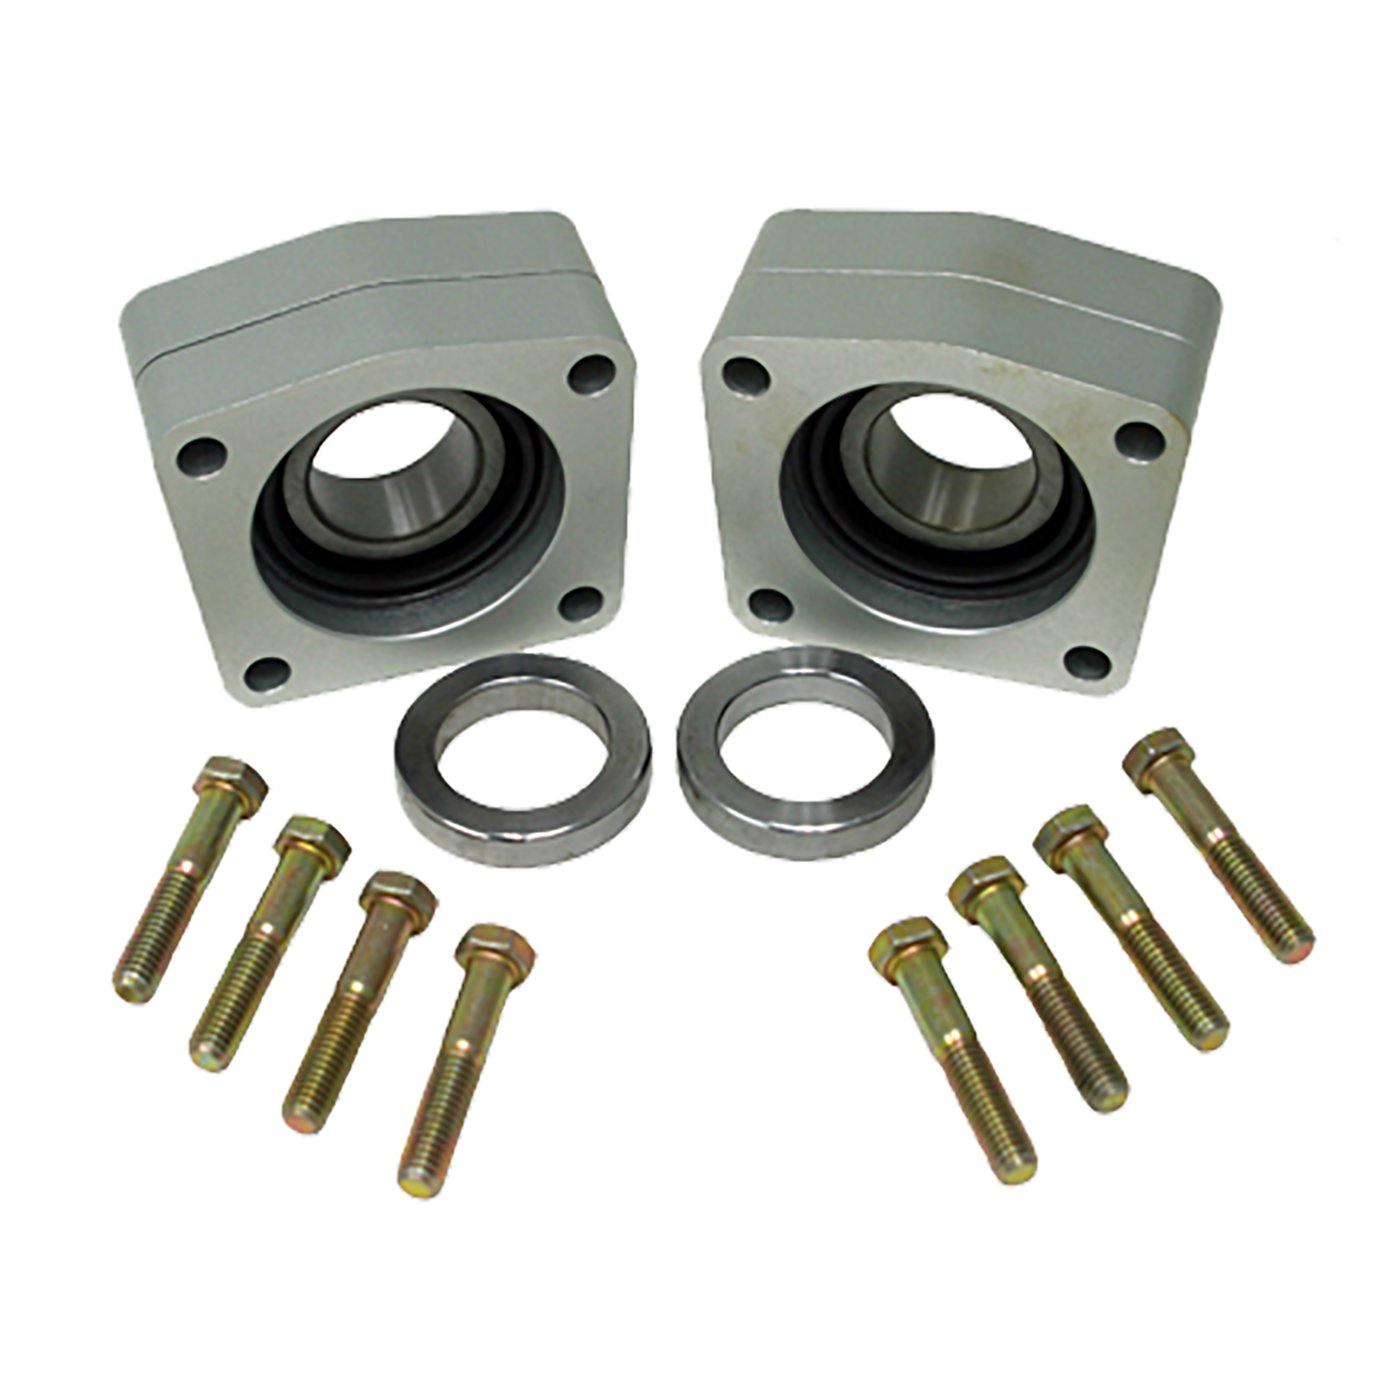 Machine Axle To 1.532 in. (GM Only) C/Clip Eliminator Kit With 1559 Bearing.